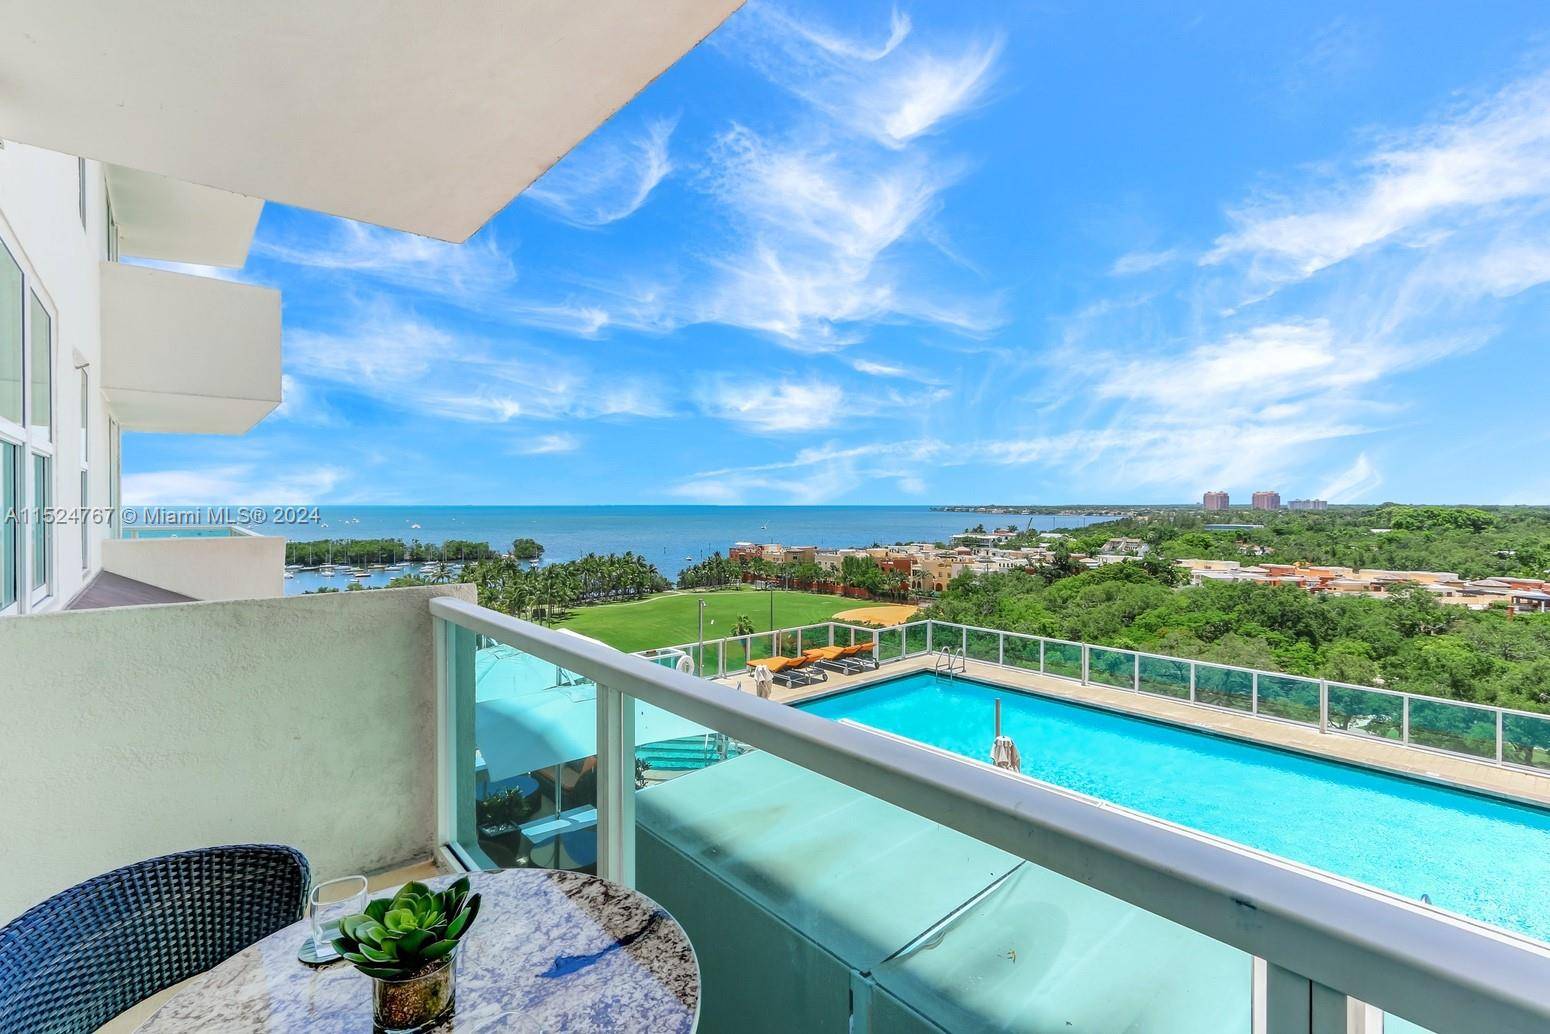 Stunning residence with bay, pool city views in Arya, a full service luxury condo hotel in the heart of Coconut Grove s historic village.